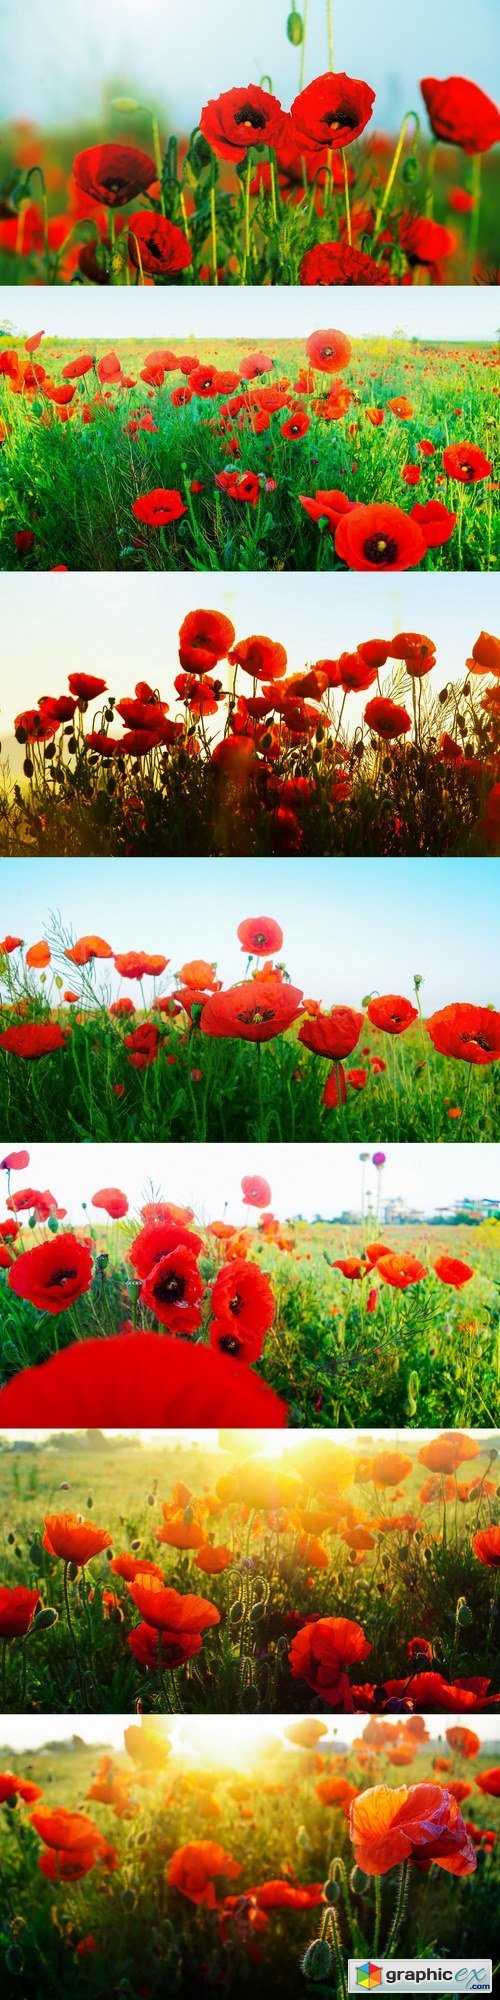 The huge field of red poppies flowers